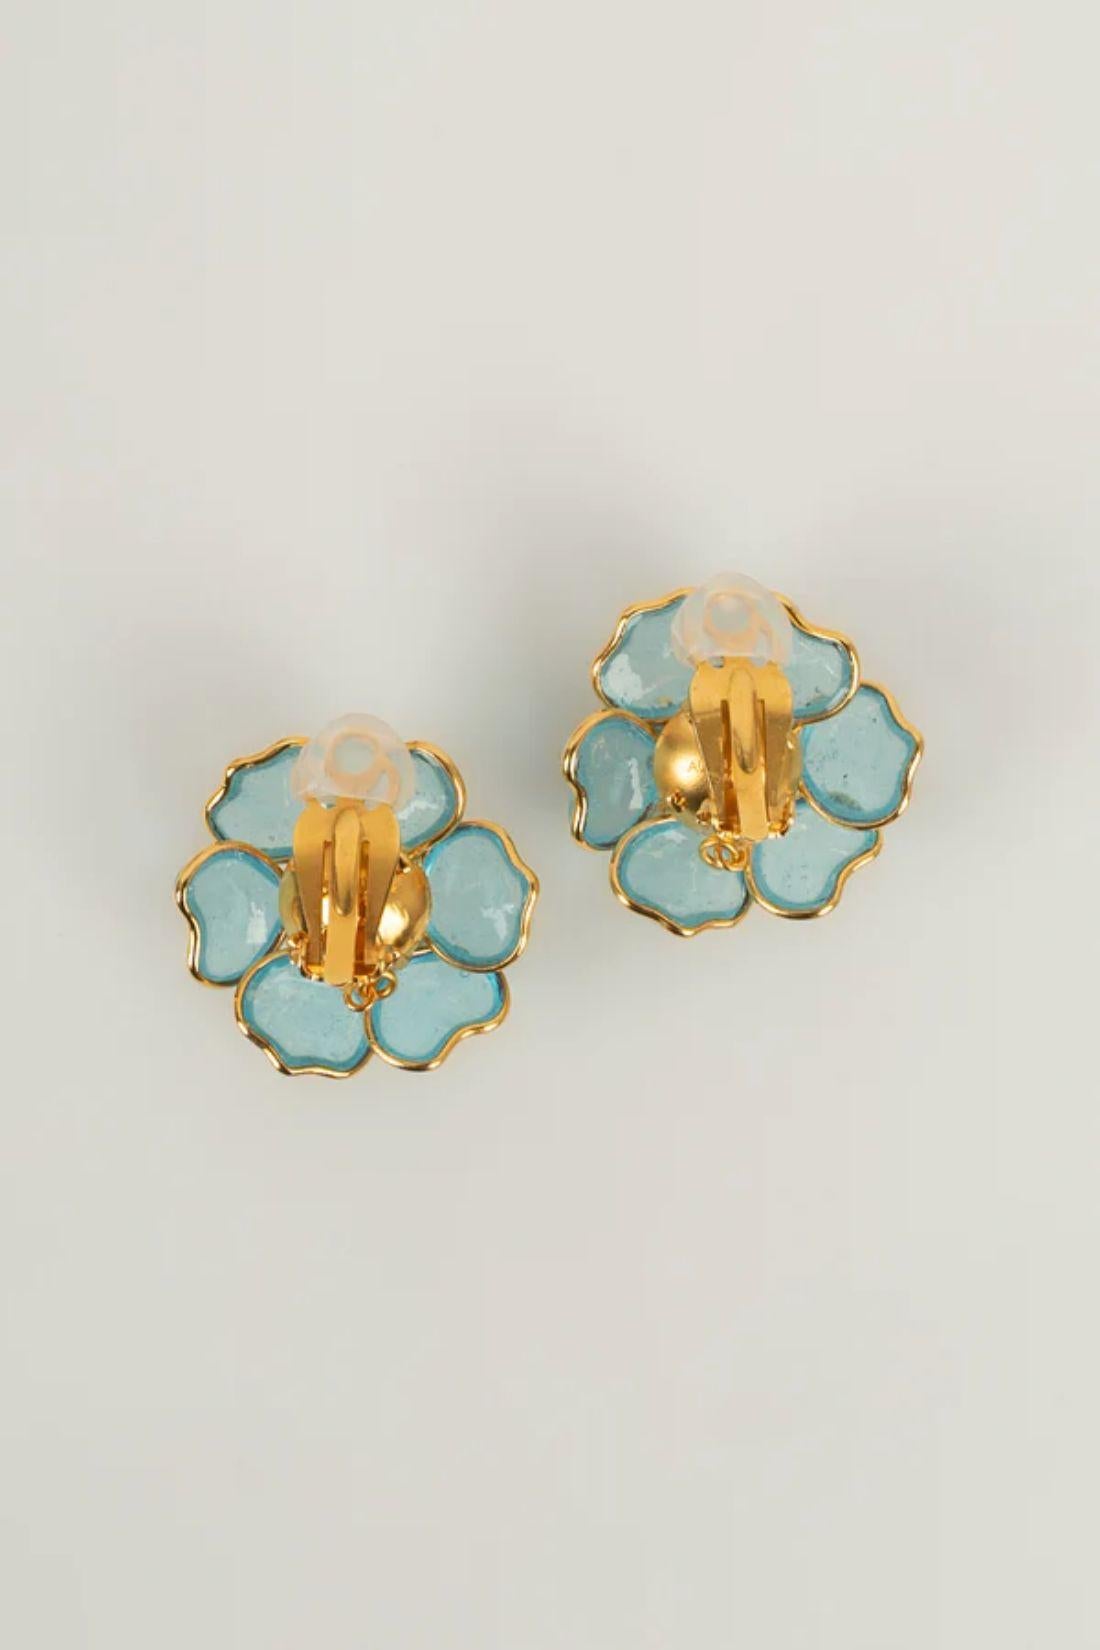 Artist Augustine Earrings in Gold metal, Blue Glass Paste and Fancy Pearl For Sale